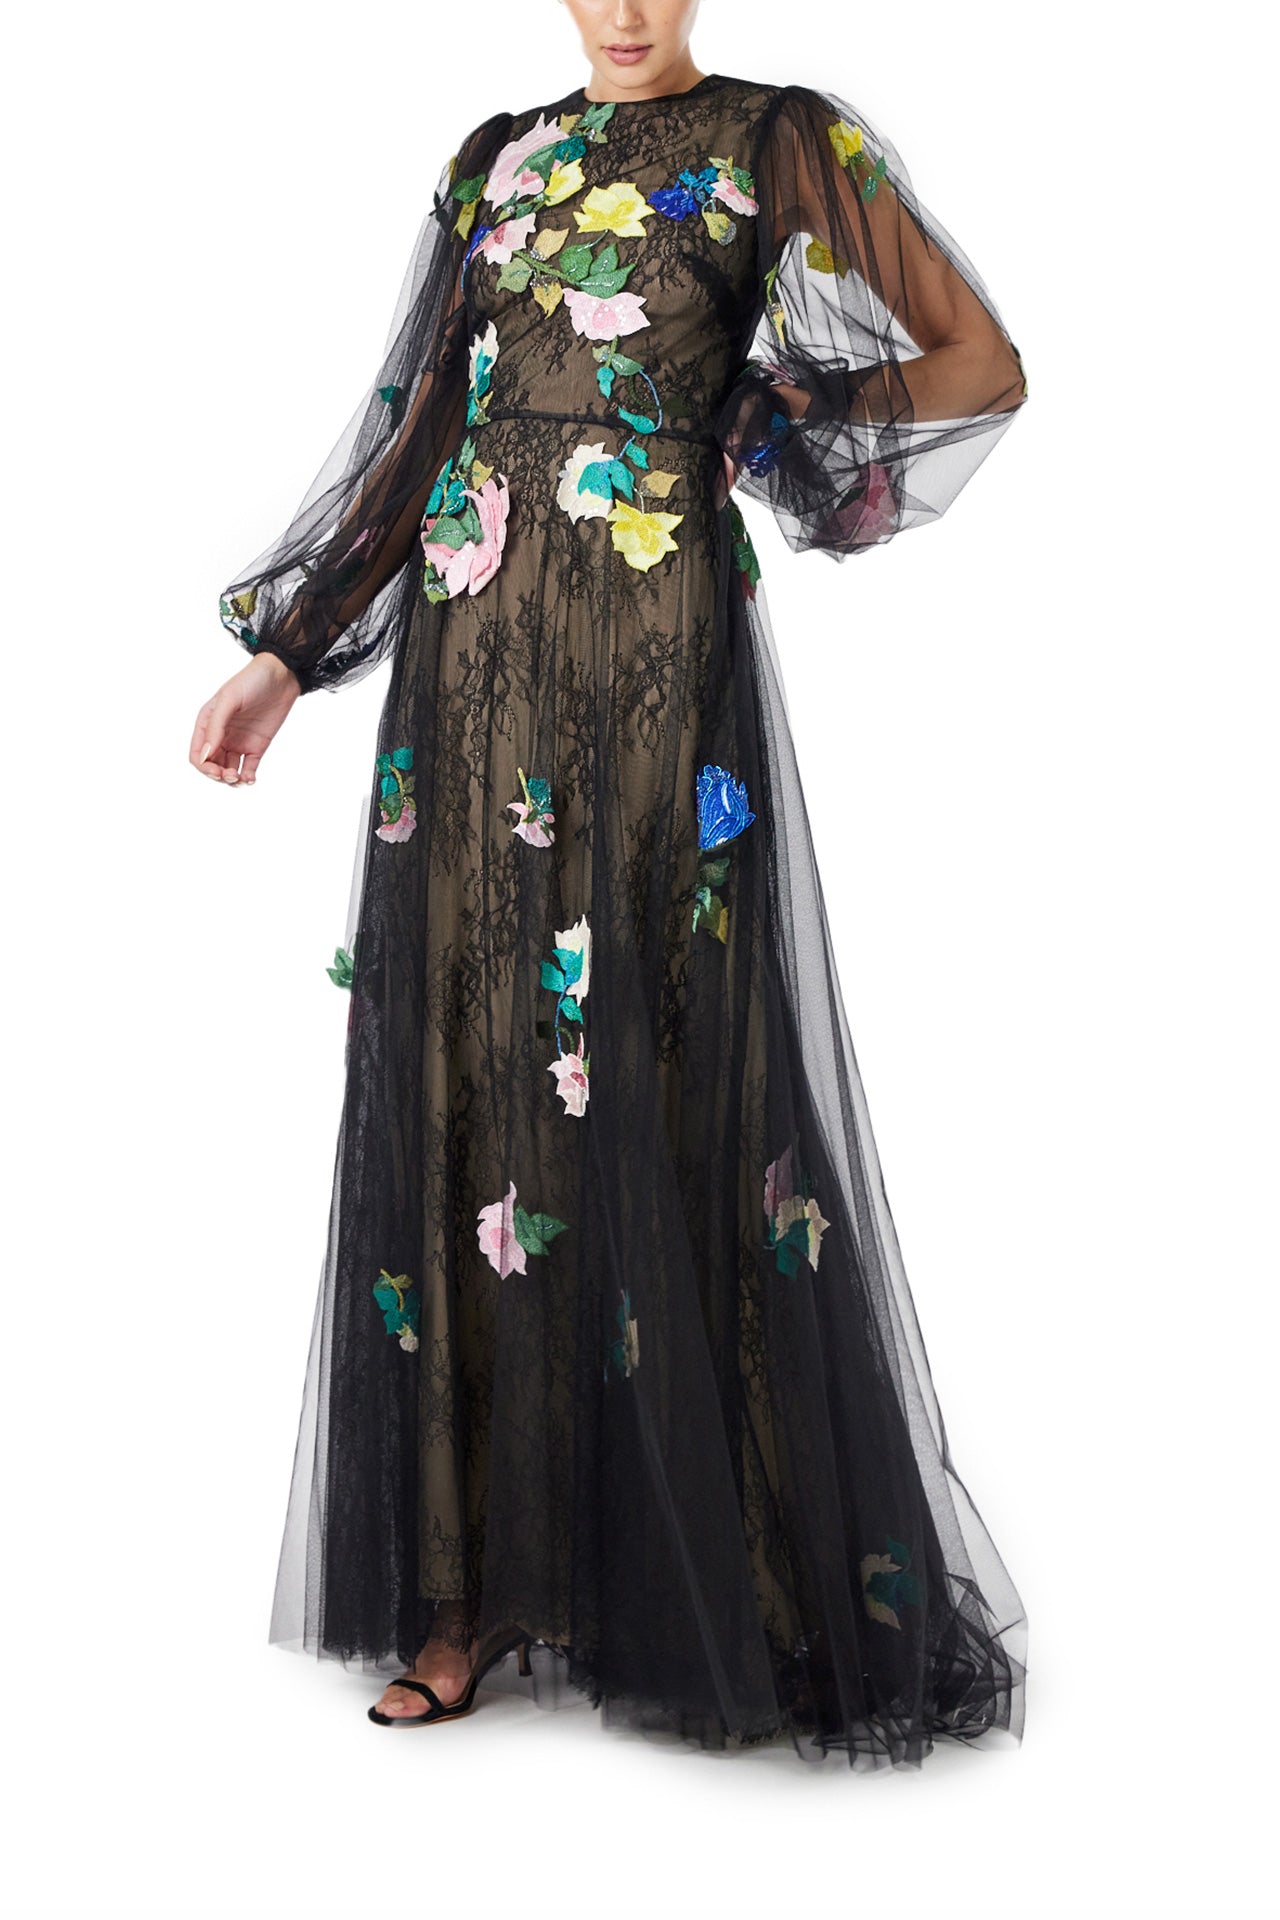 Monique Lhuillier Spring 2024 jewel neck, puff sleeve gown with sheer sleeves and floral embroidery over a lace underlay in black tulle - front two.